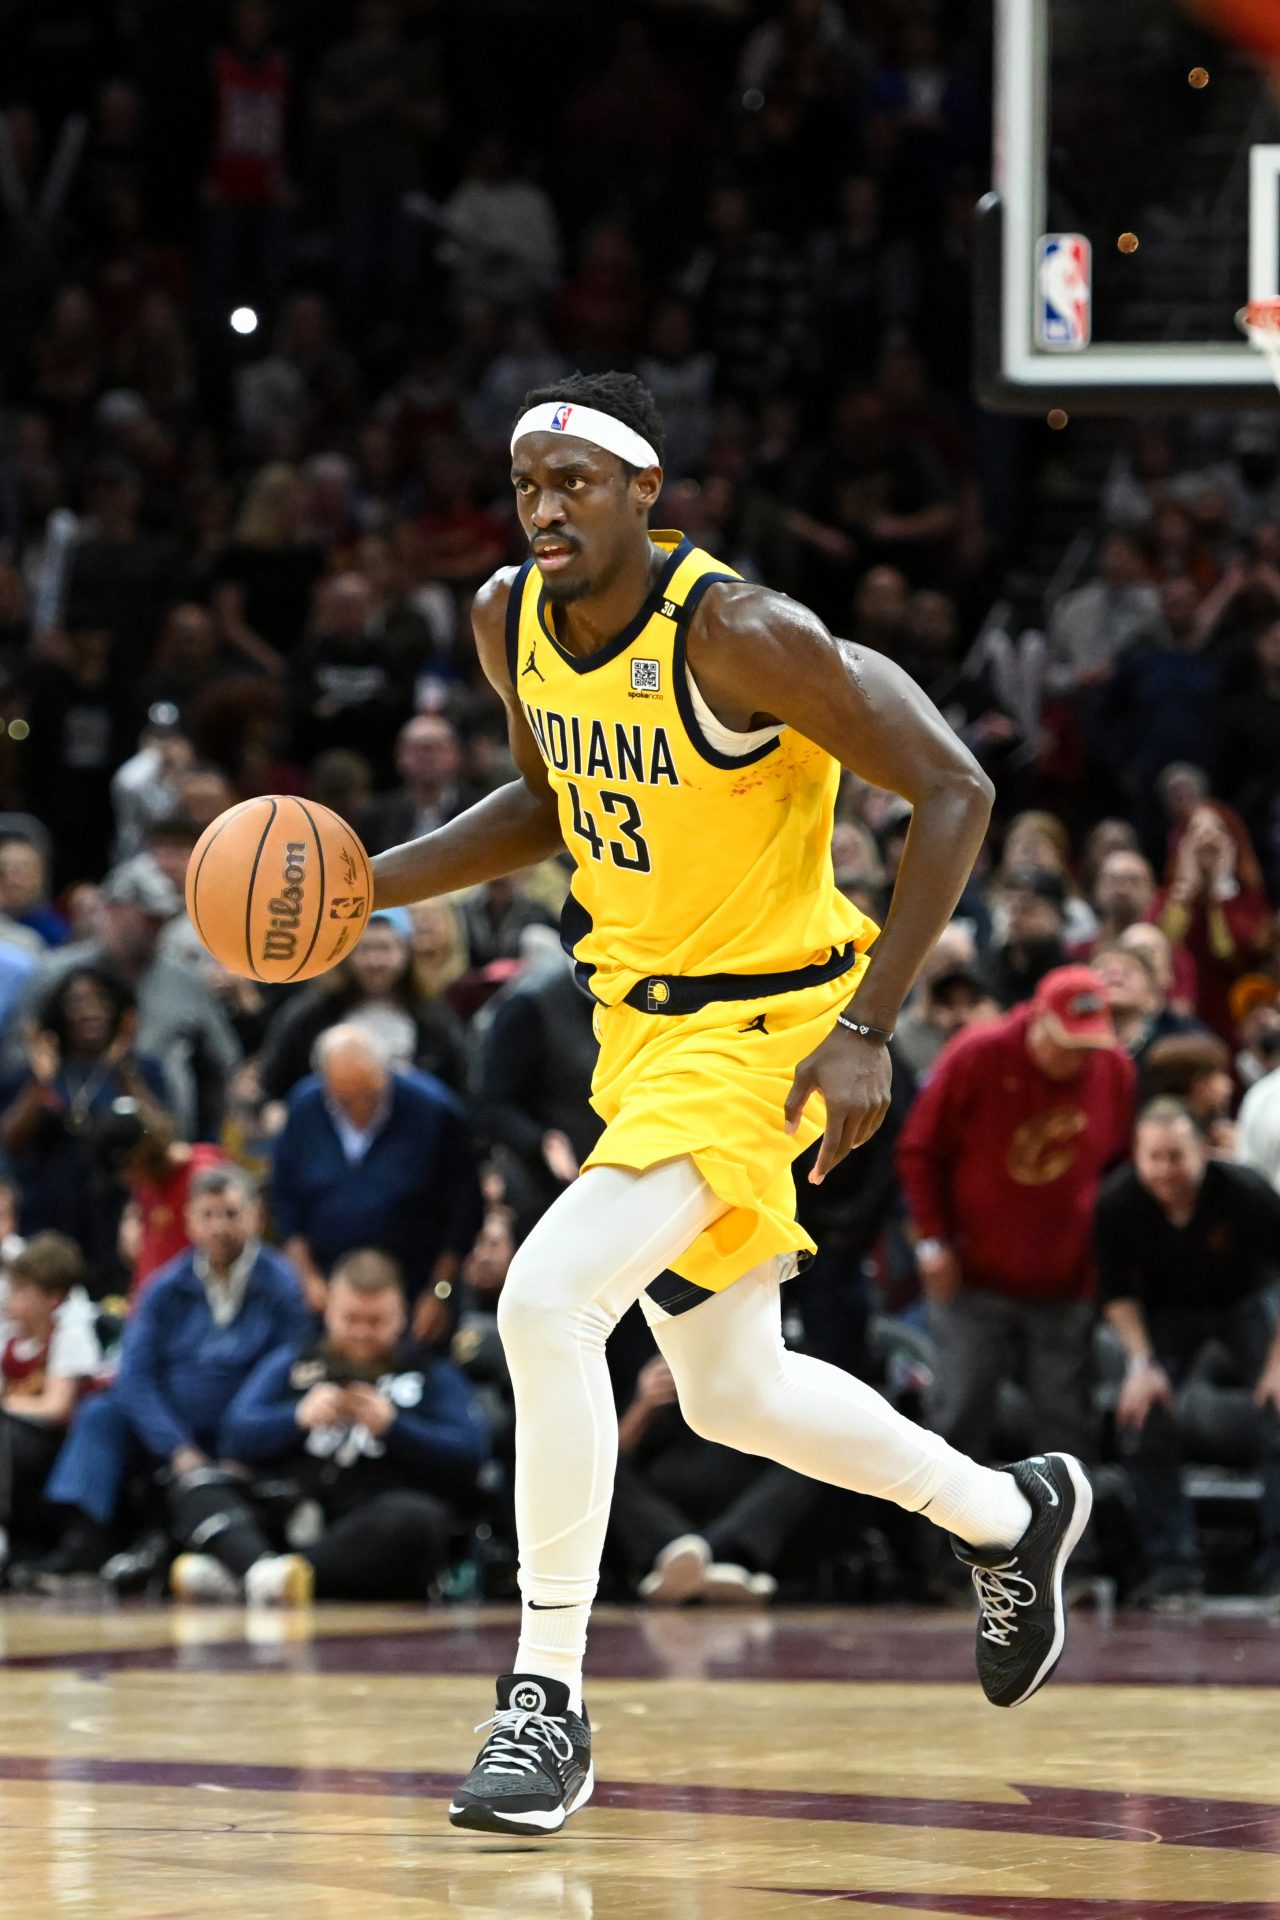 NBA Game 7 recap and takeaways: Pacers defeat Knicks to advance in NBA Playoffs